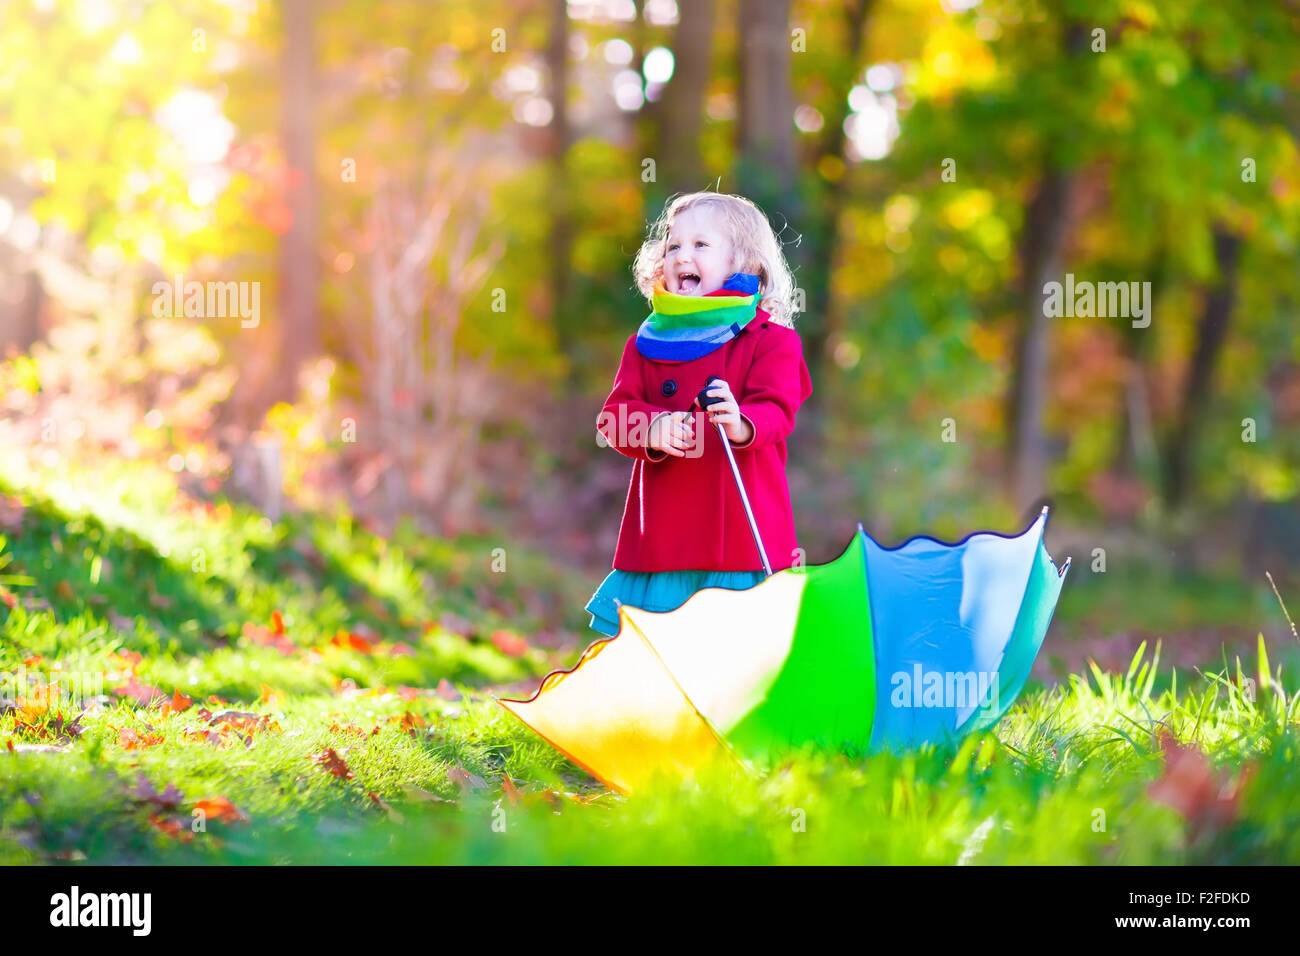 Little girl playing in the rain in autumn park. Child holding umbrella walking in the forest on a sunny fall day. Stock Photo